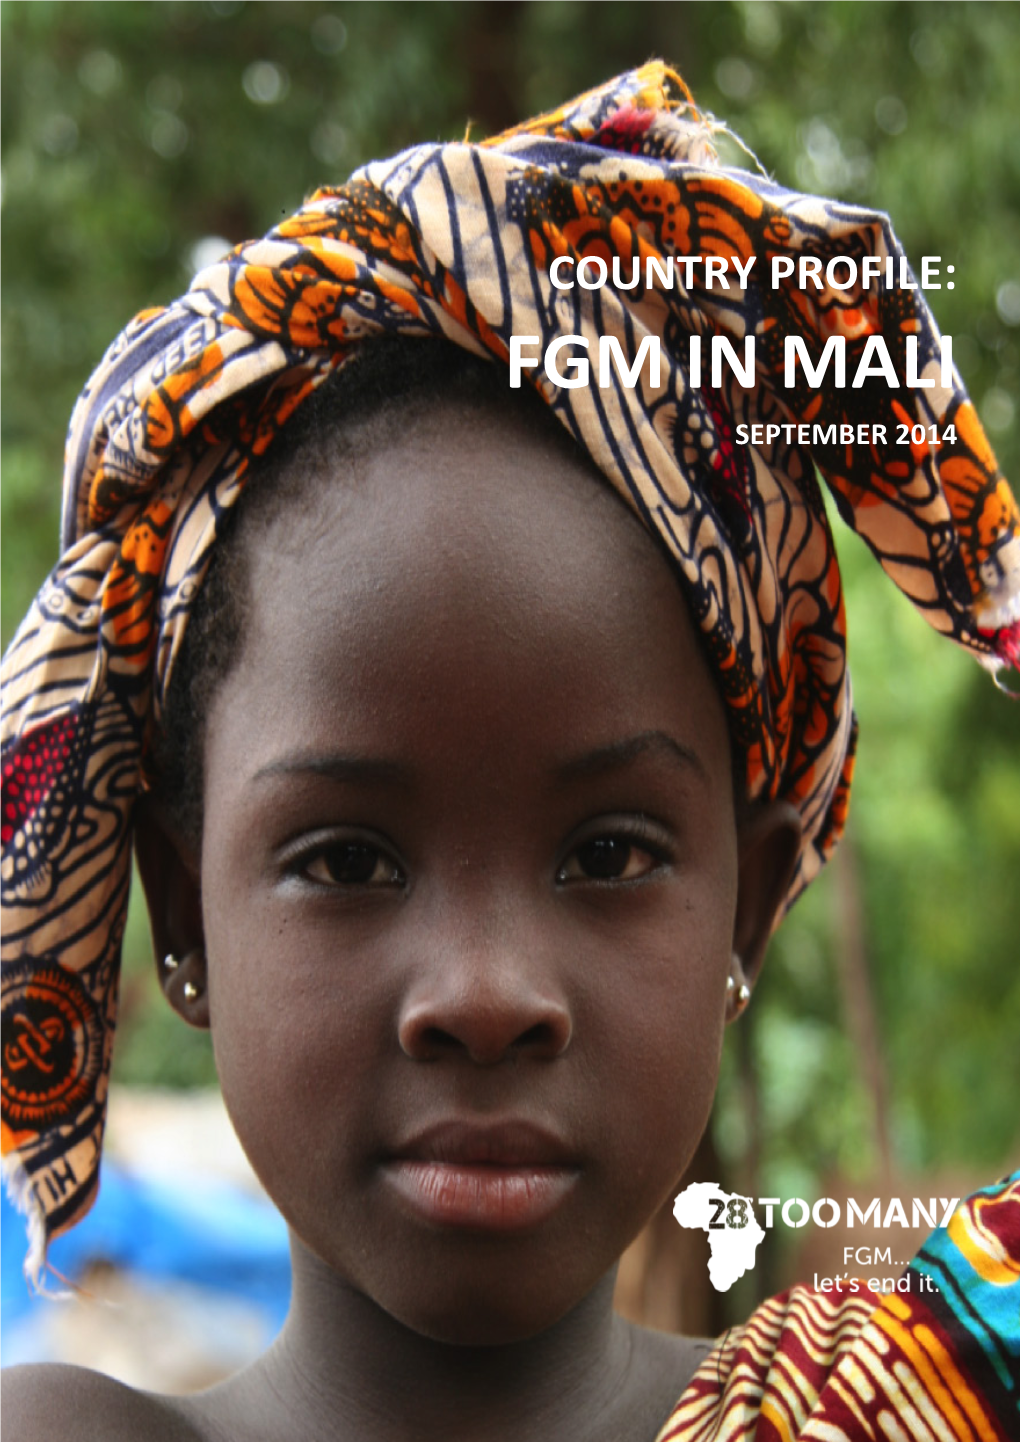 Country Profile: Mali, 28 Too Many, September 2014